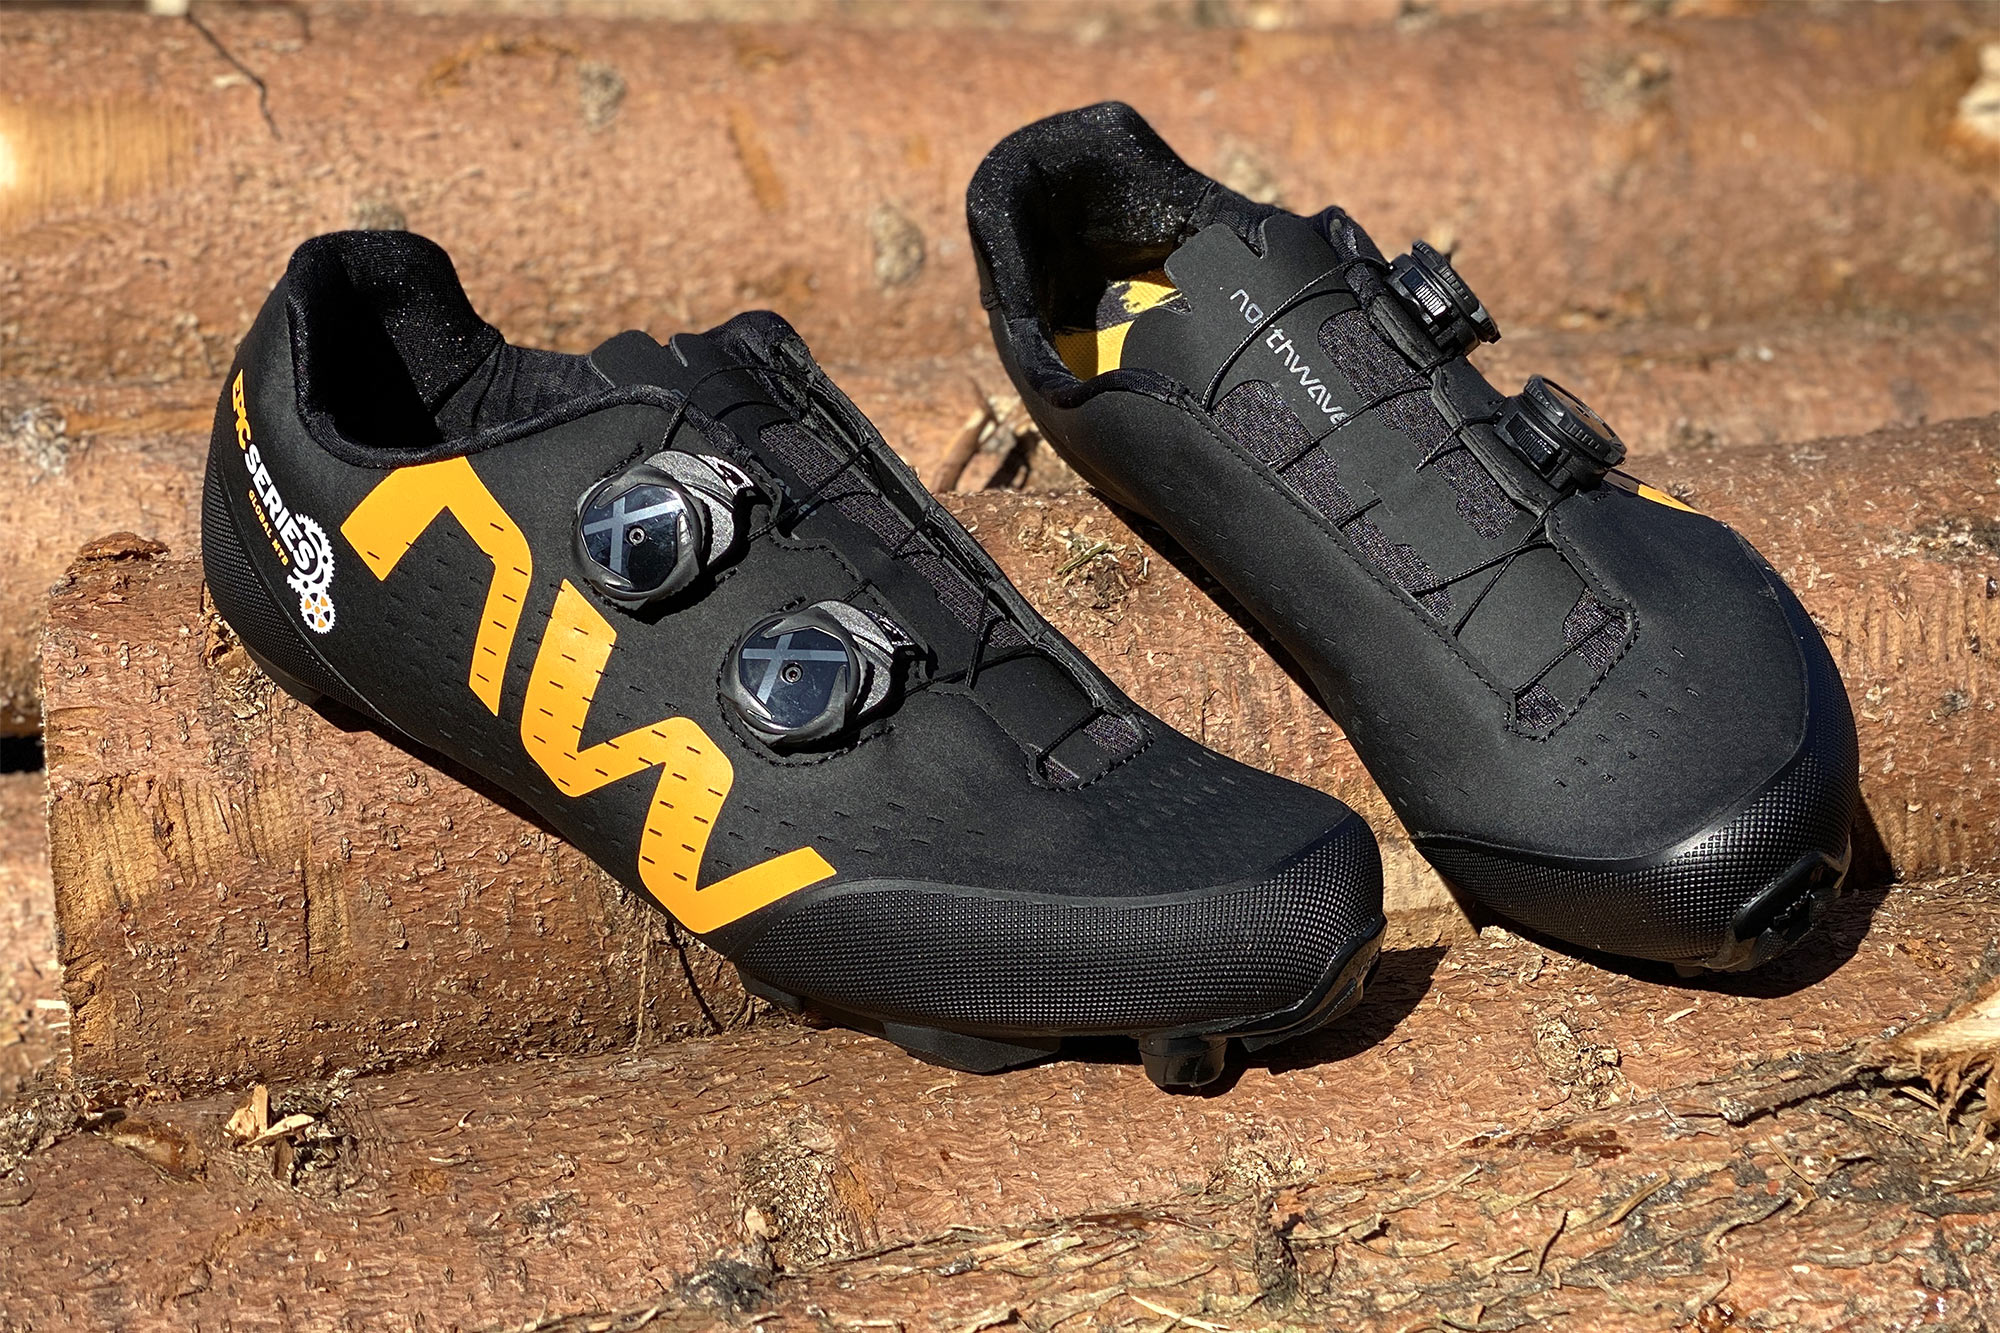 Northwave Rebel 3 X Epic Series MTB shoe, special edition carbon XC mountain bike shoes